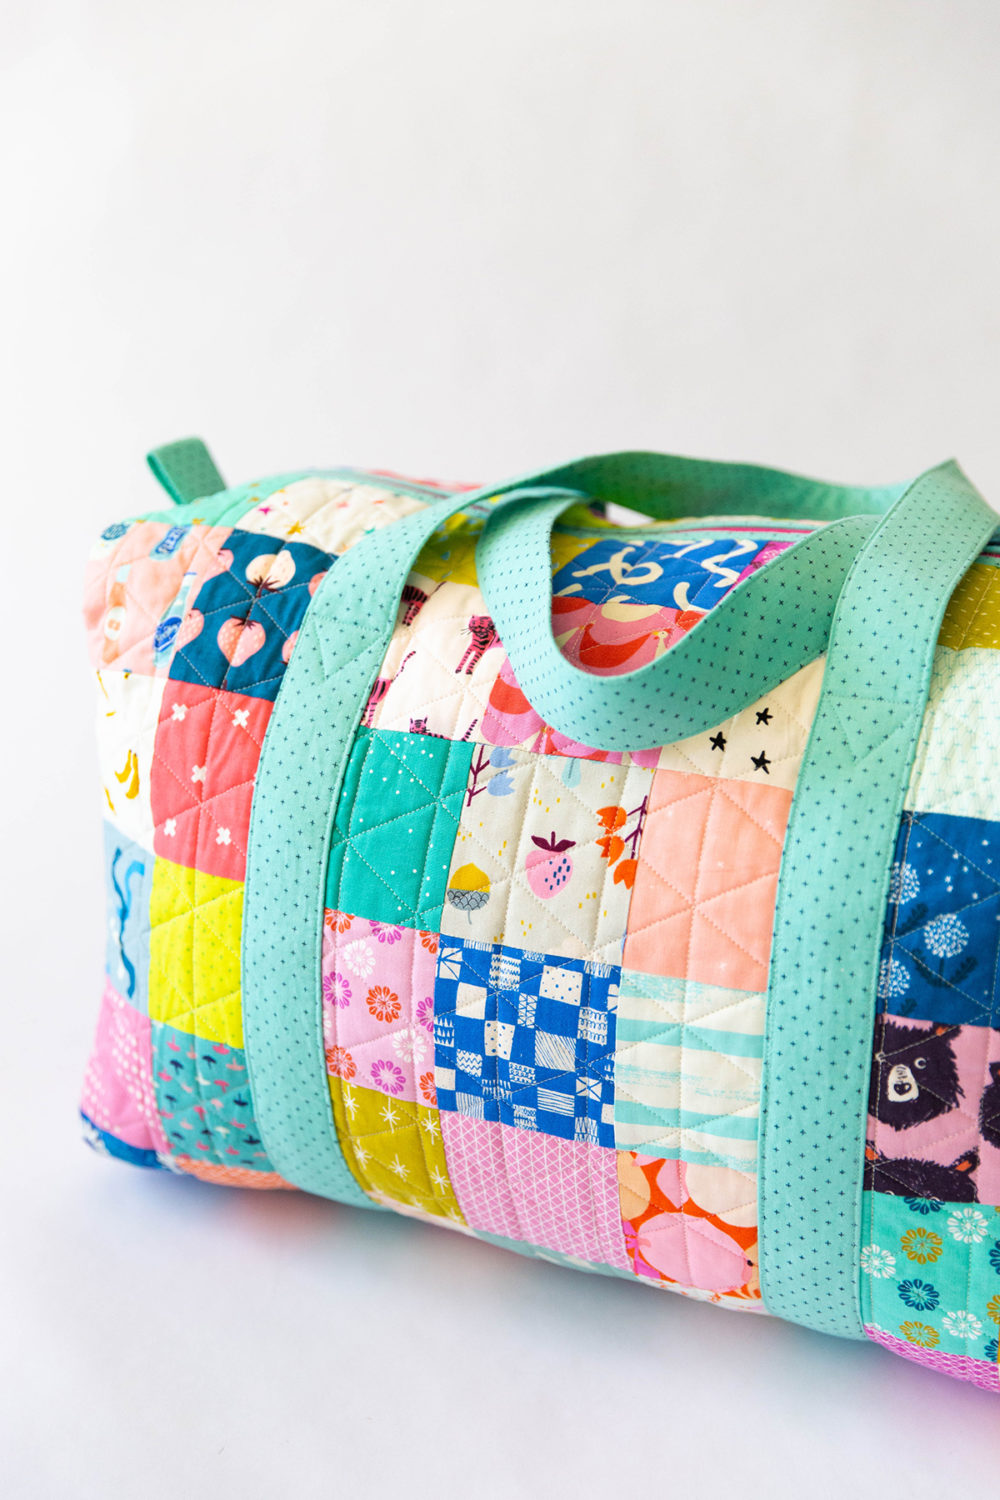 Duffle Bag Tutorial and Pattern ~